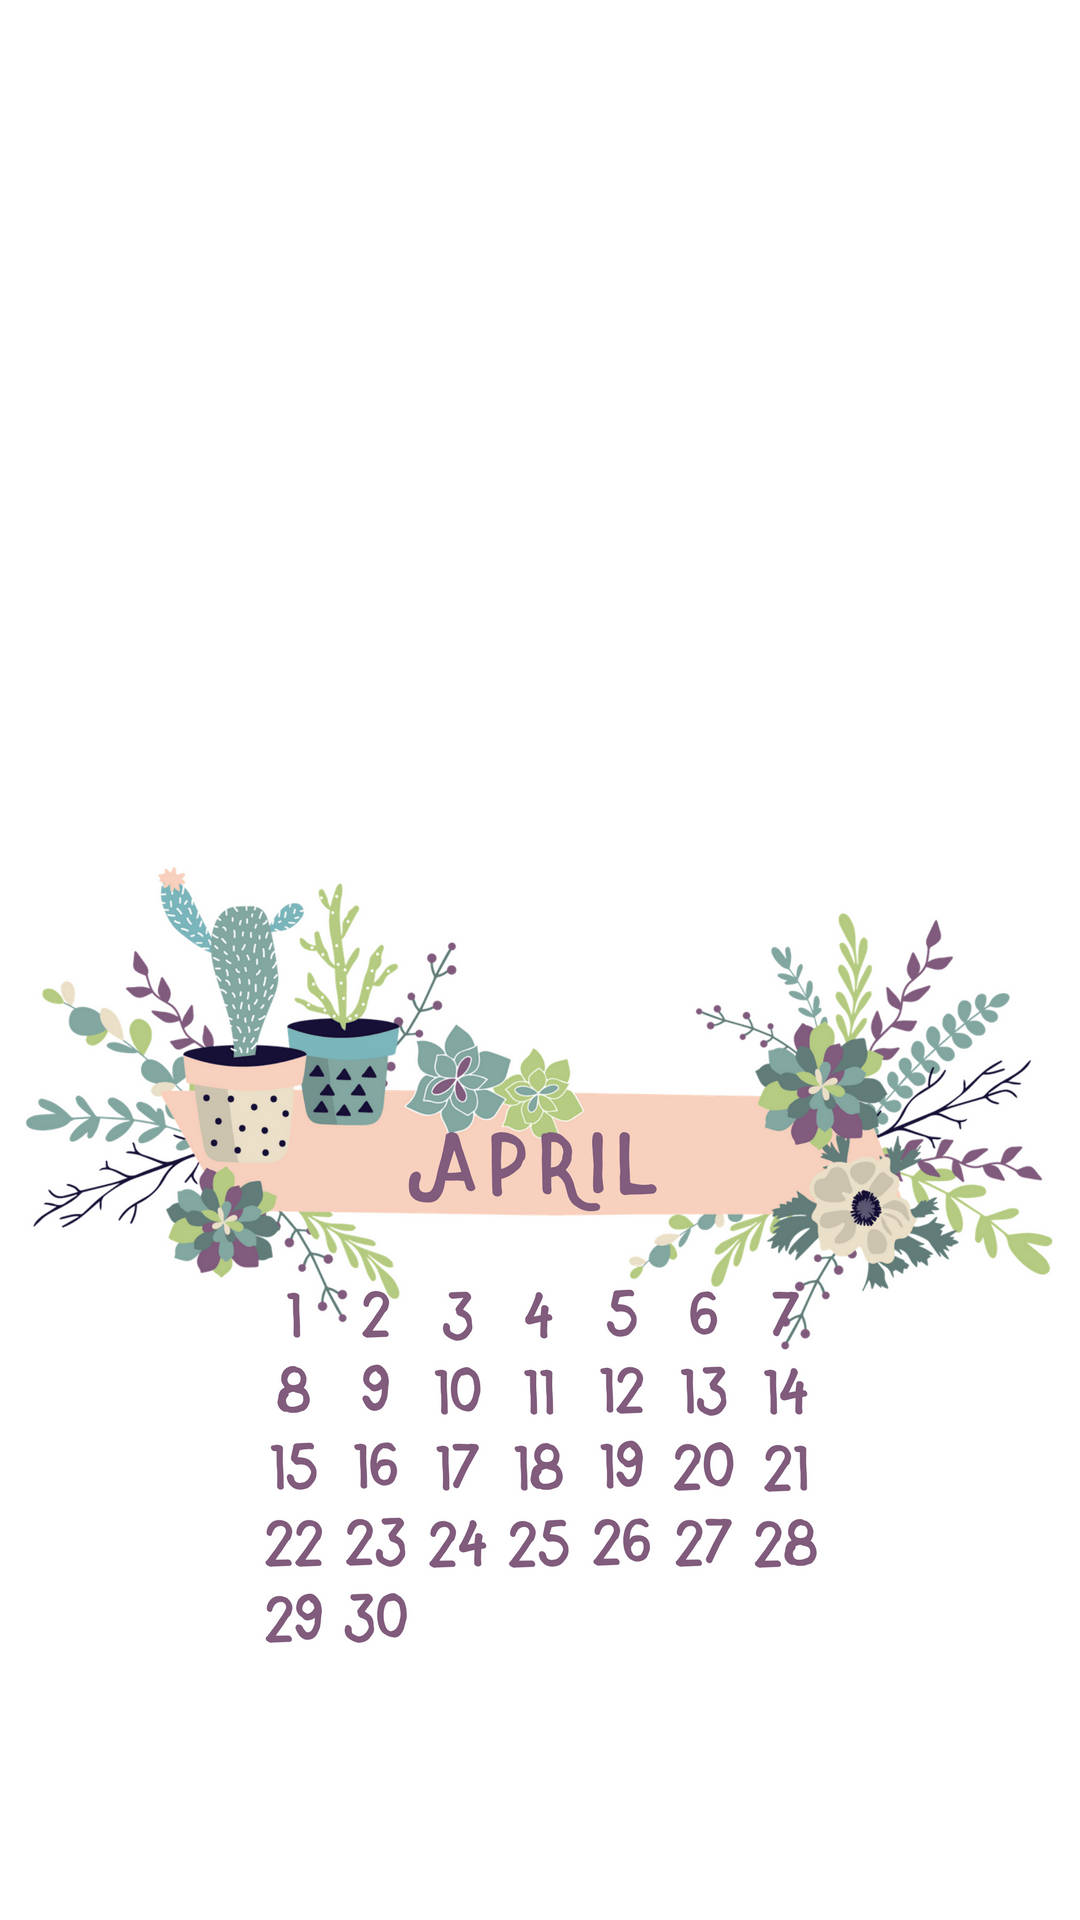 Welcome April with Fun and Versatility Wallpaper